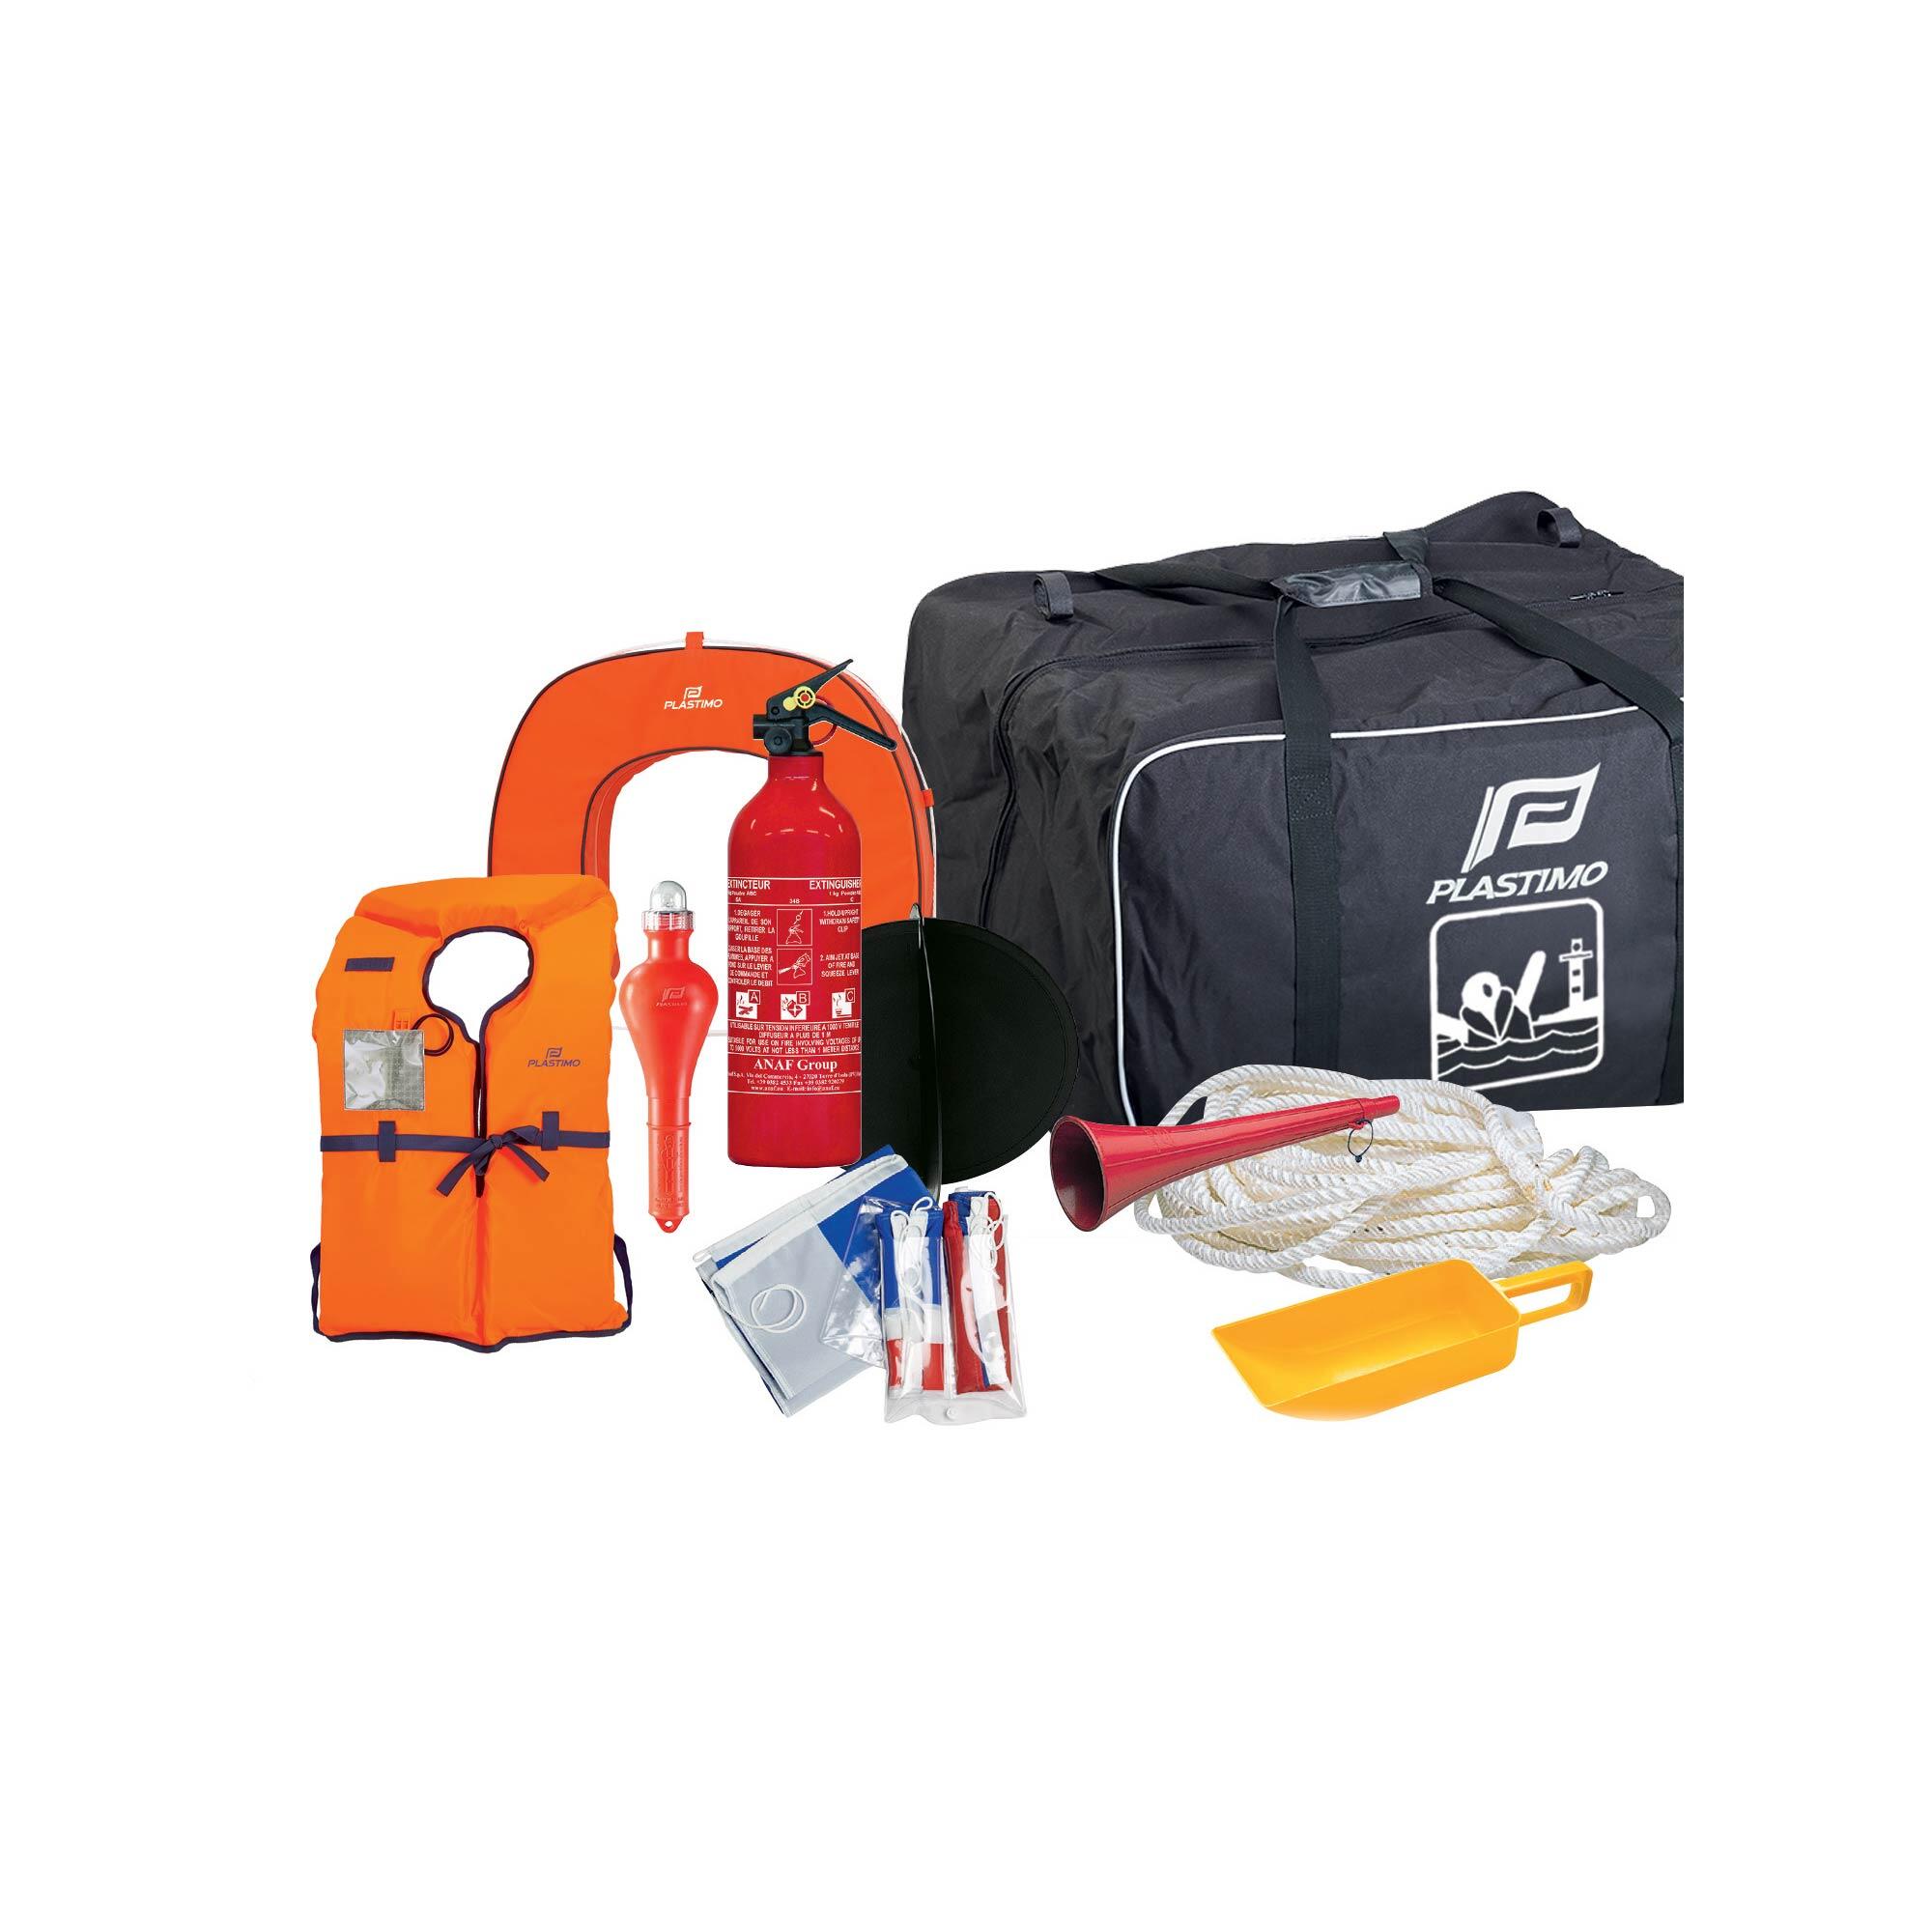 INSHORE BOATING SAFETY KIT BASIC 4 people and under 2 miles 1/1